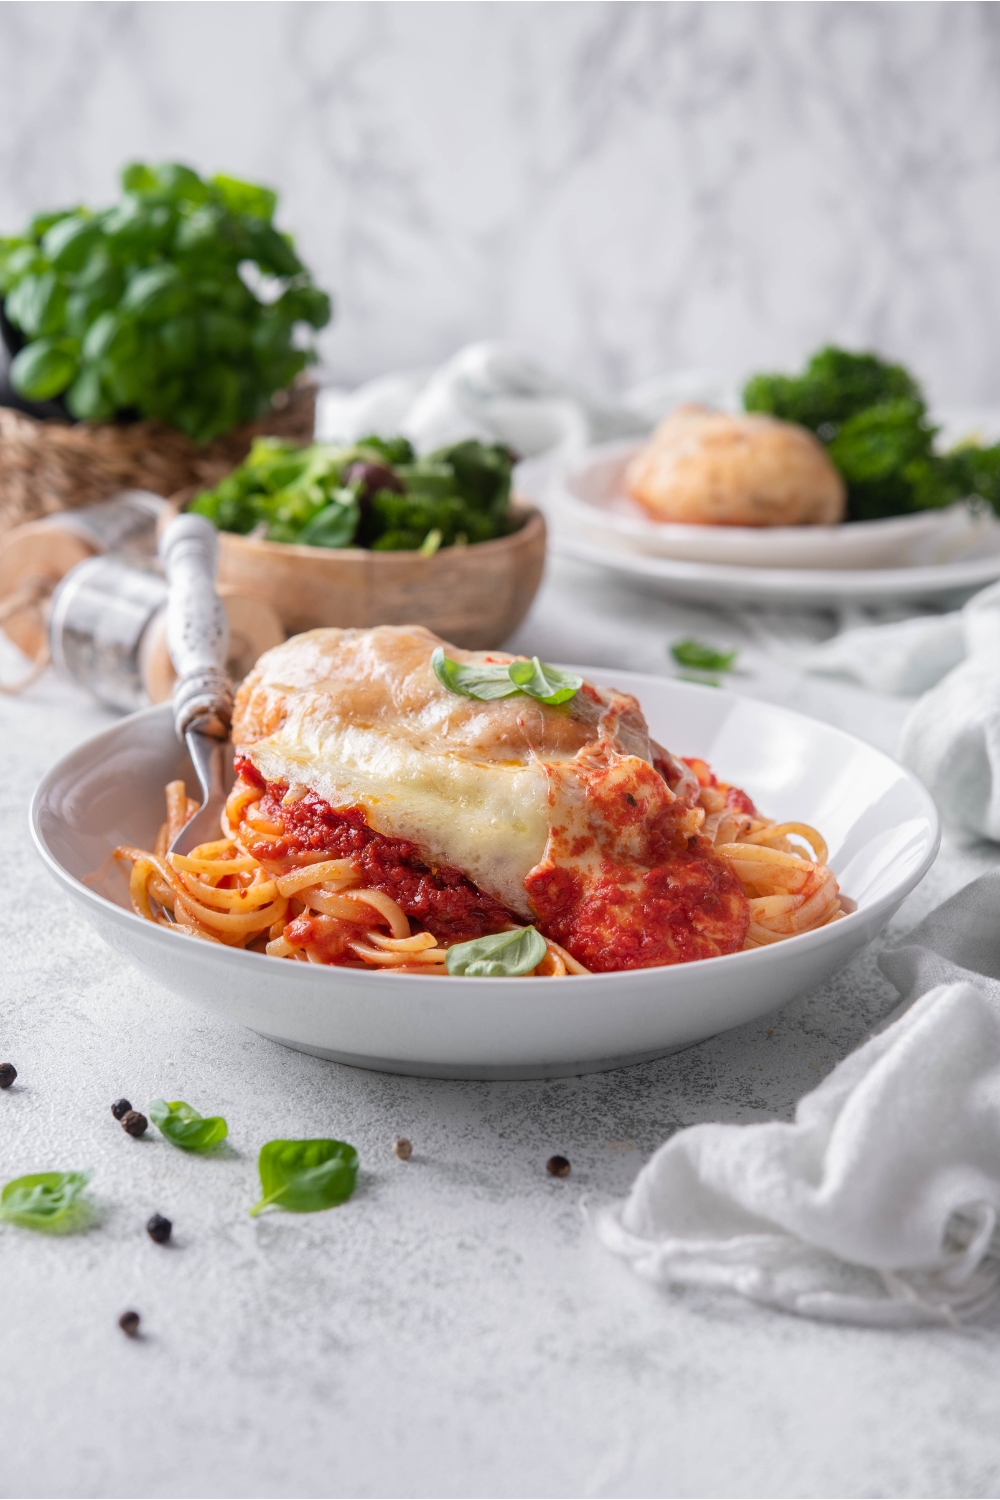 A bowl of chicken parmesan with chicken covered in melted cheese, a garnish of fresh basil, and served on a bed of pasta with marinara sauce.